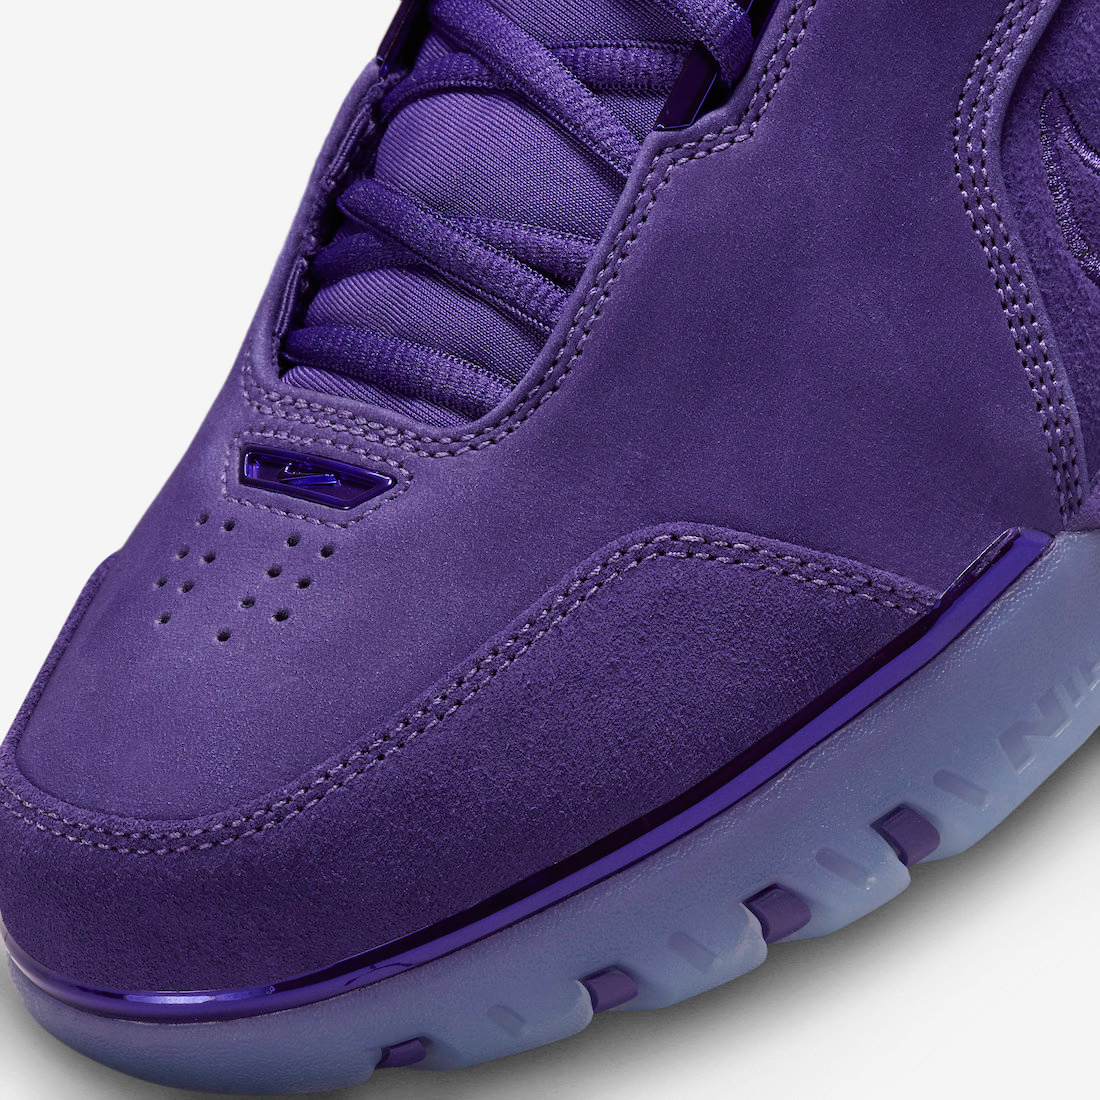 Nike-Air-Zoom-Generation-Court-Purple-Release-Date-7